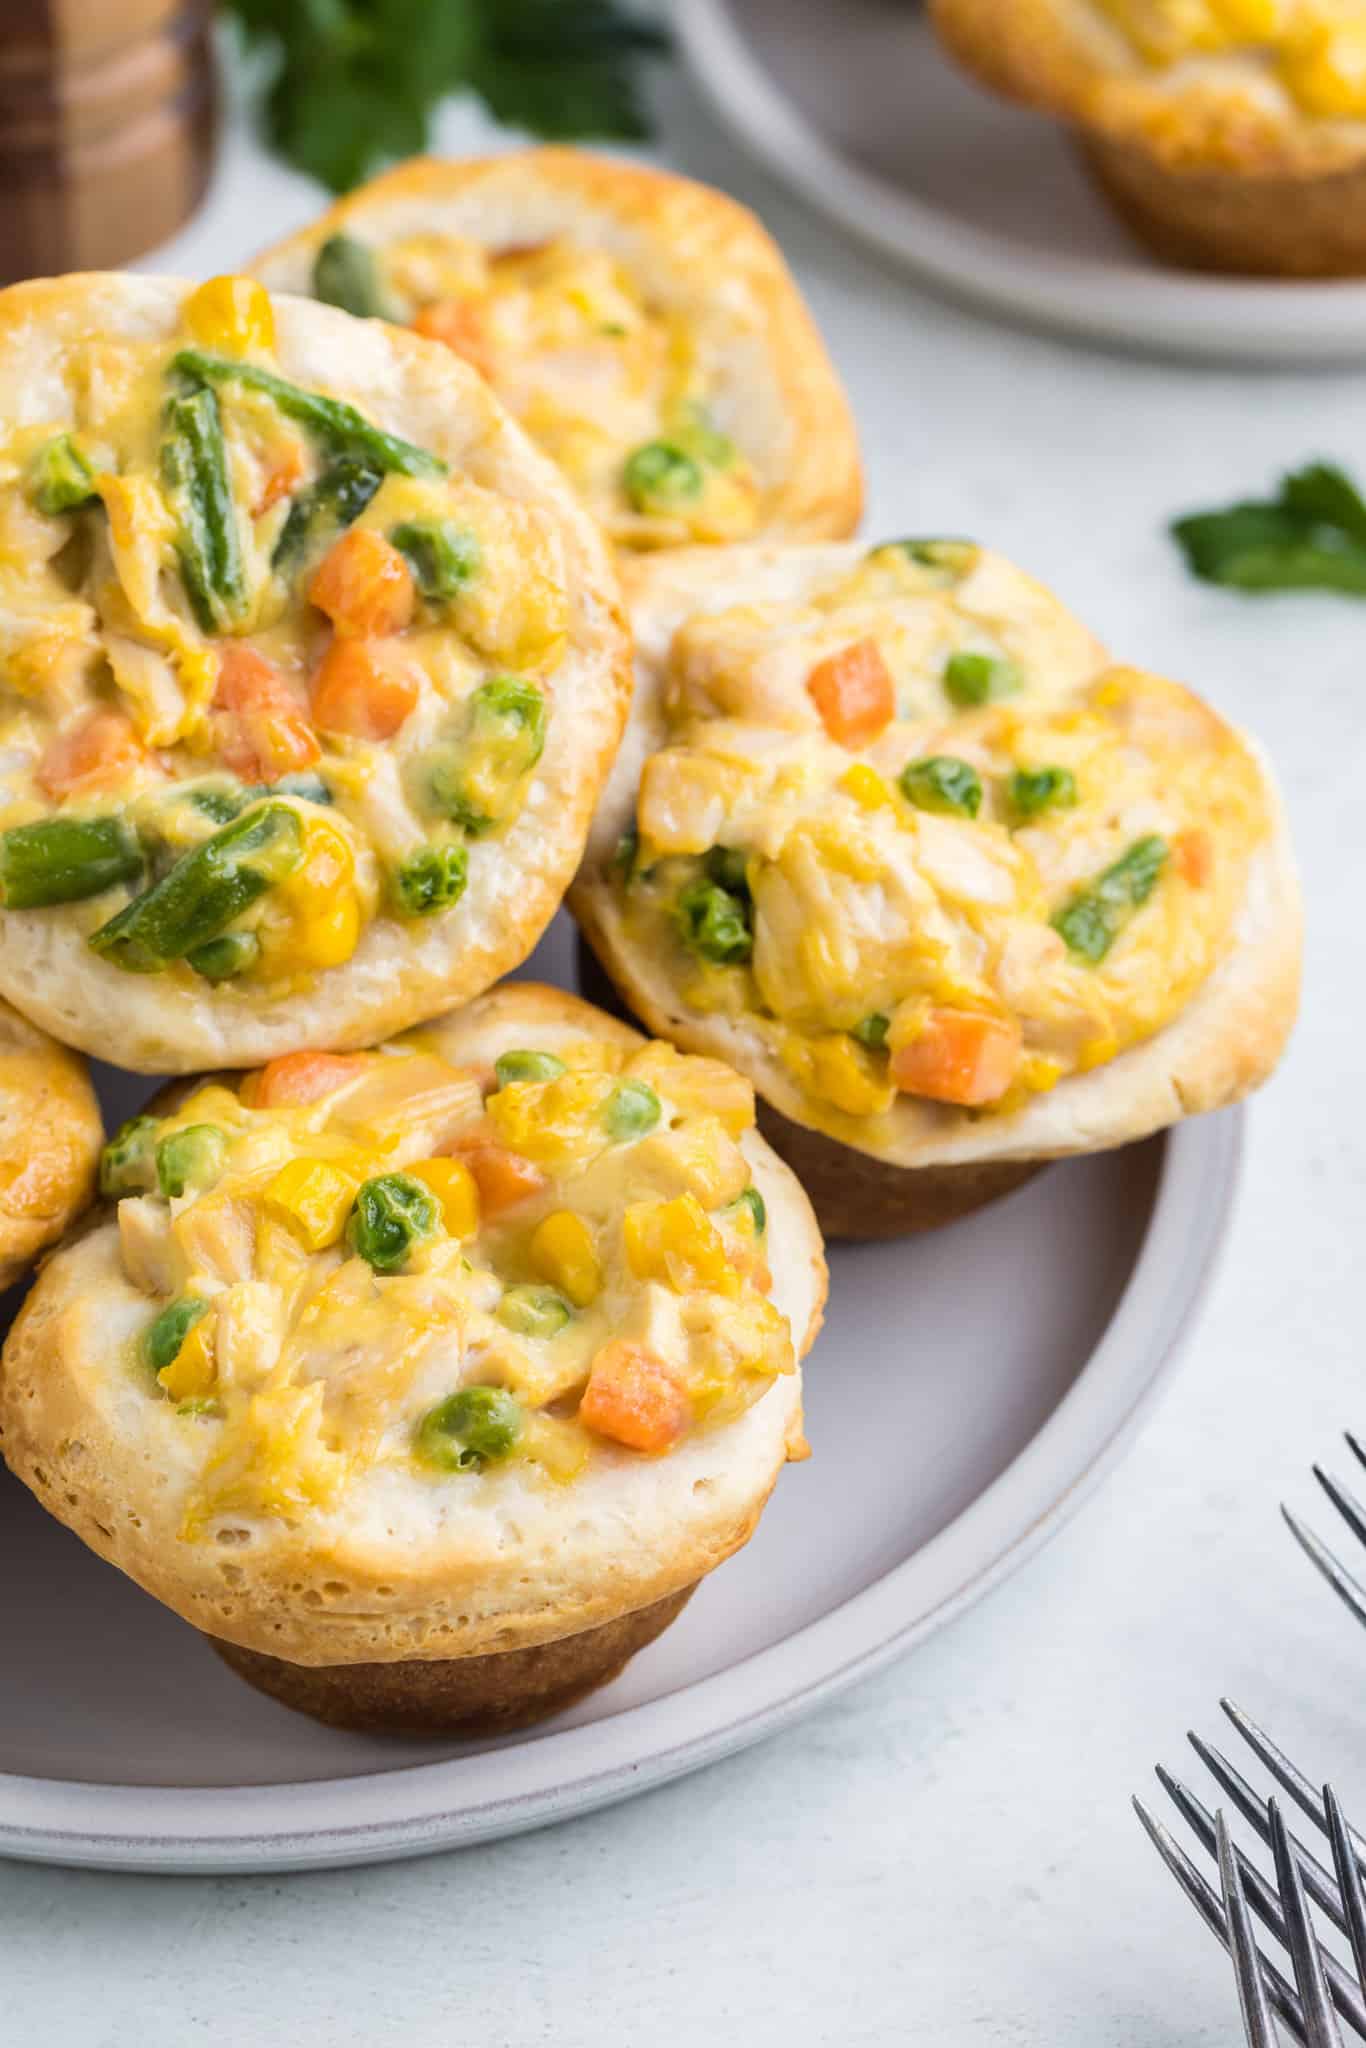 Mini Chicken Pot Pies are an easy dinner recipe using precooked chicken, frozen mixed vegetables, cream of chicken soup and Pillsbury refrigerated biscuits.